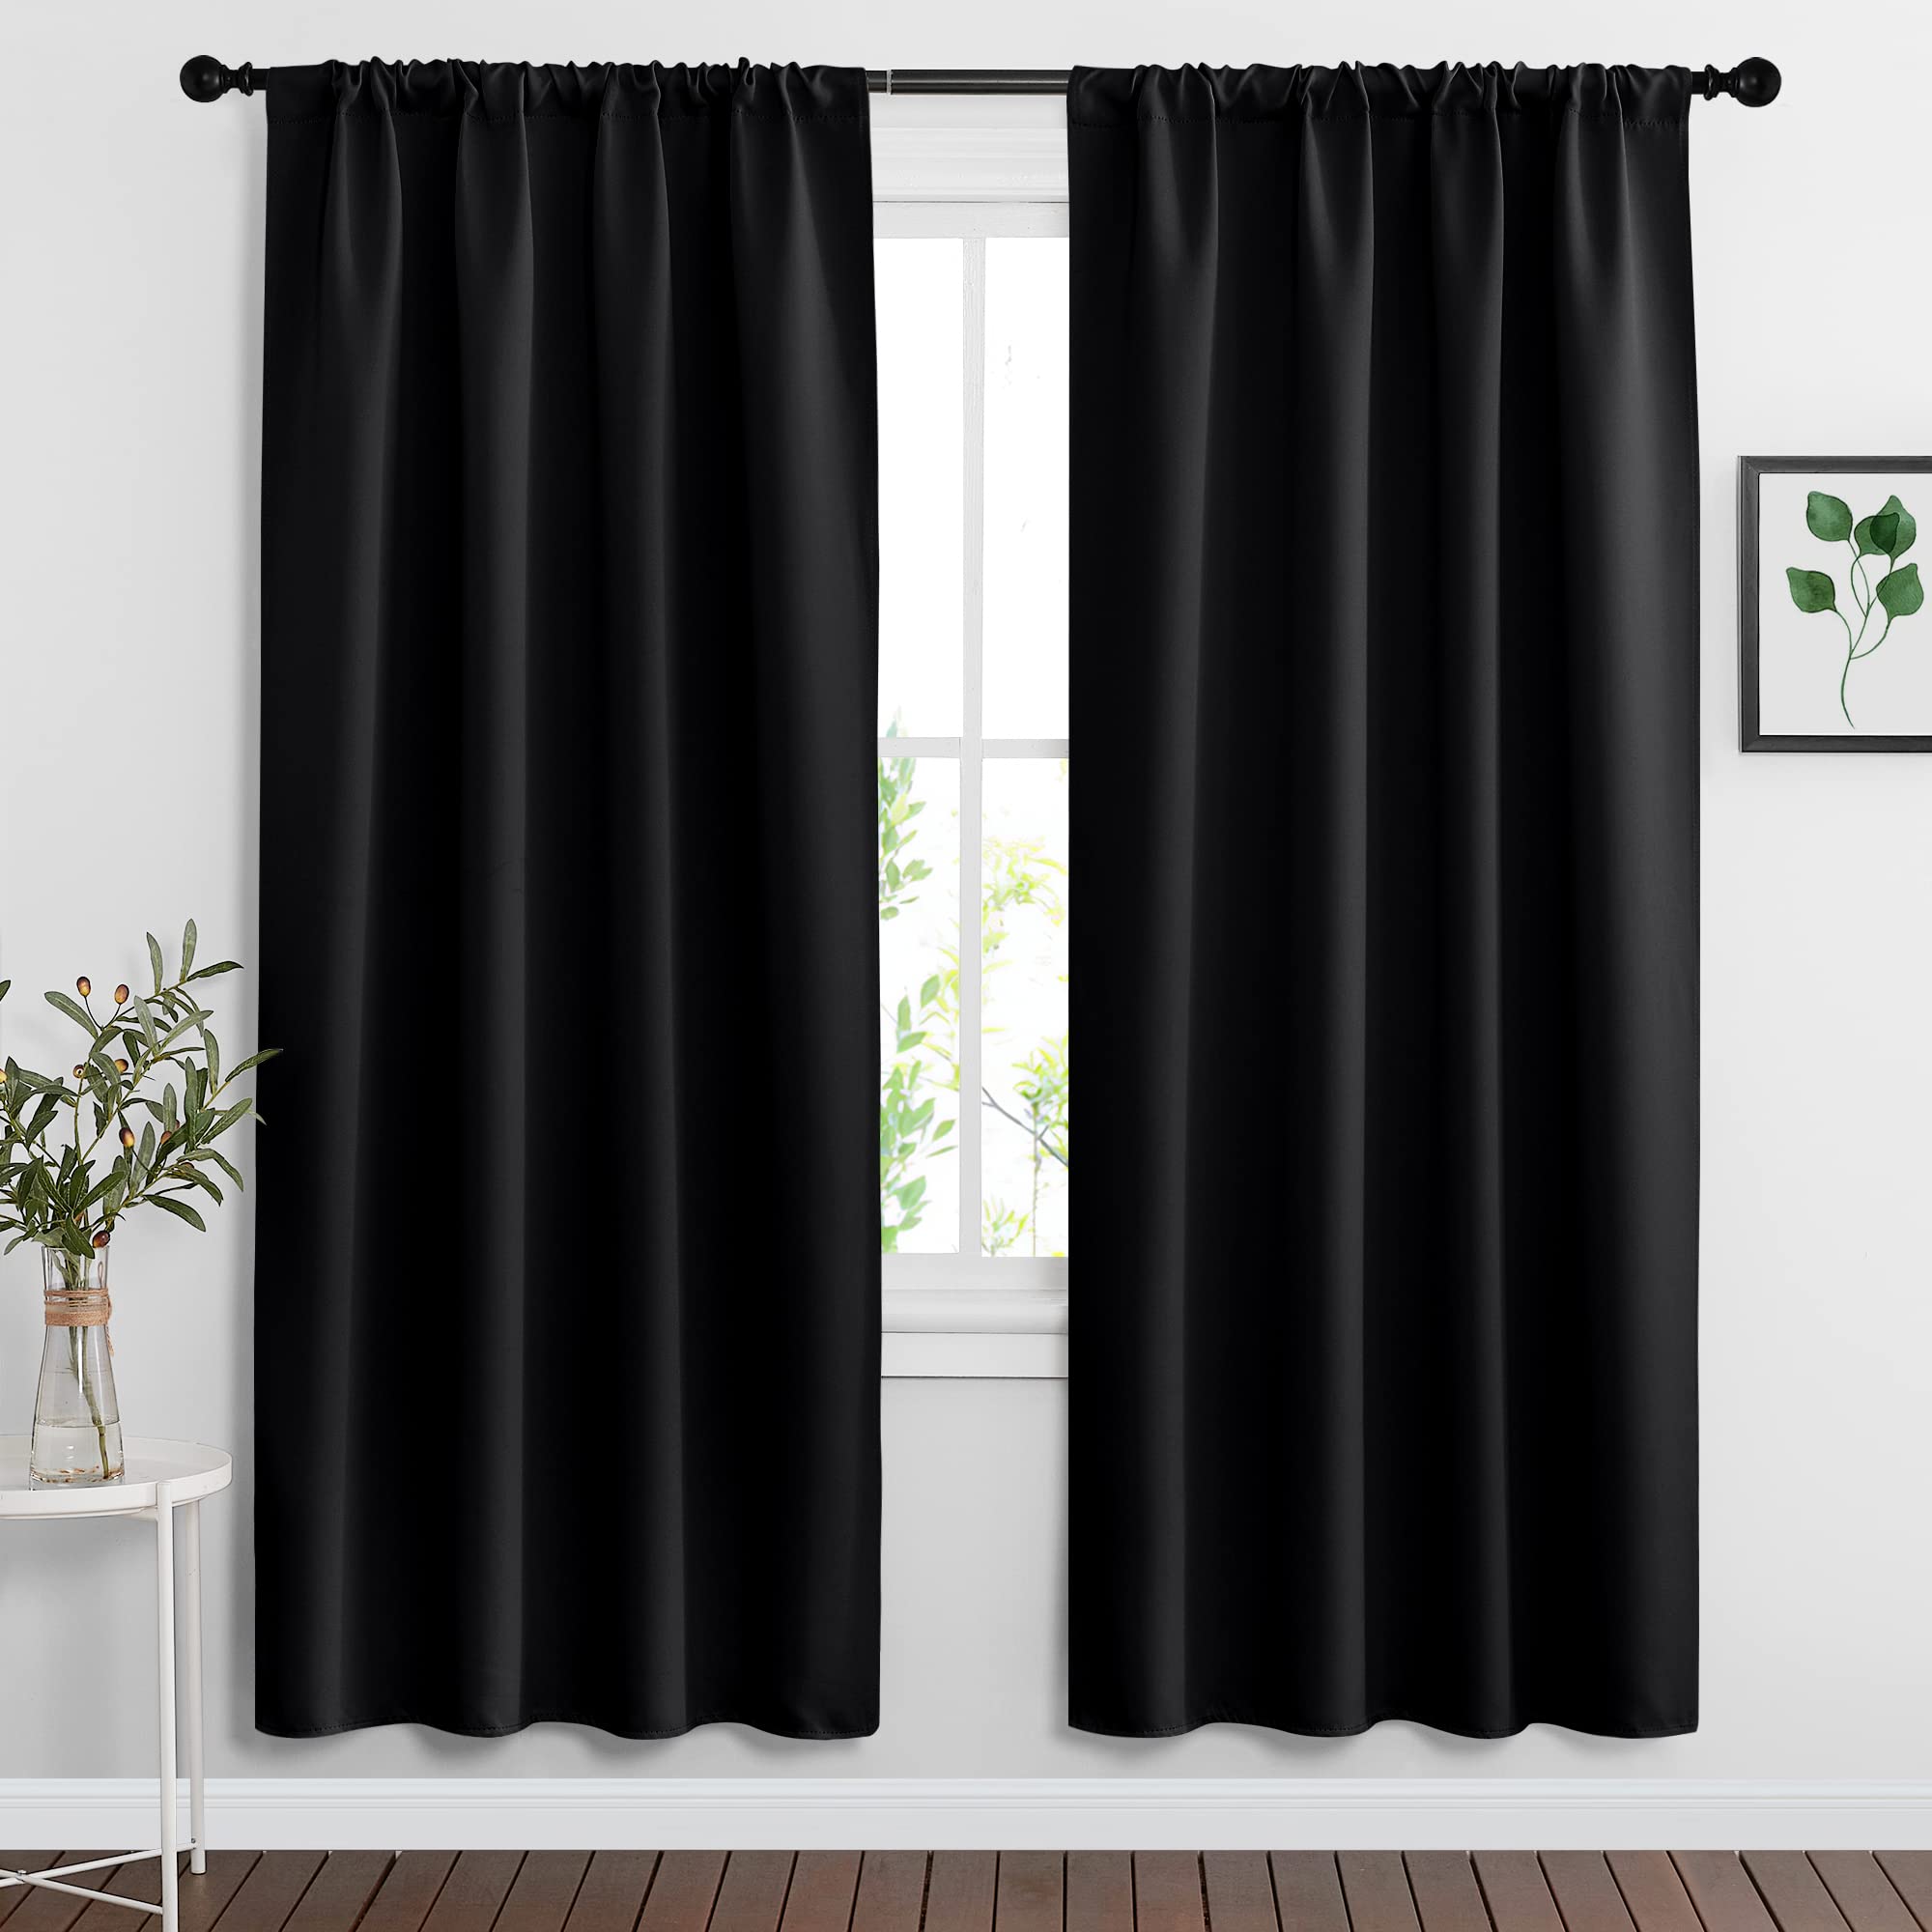 RYB HOME Bedroom Window Treatments Blackout Curtains (42 Wide x 72 Long, Black, 2 Pieces) Blackout Rod Pockets Drapes Panels Win